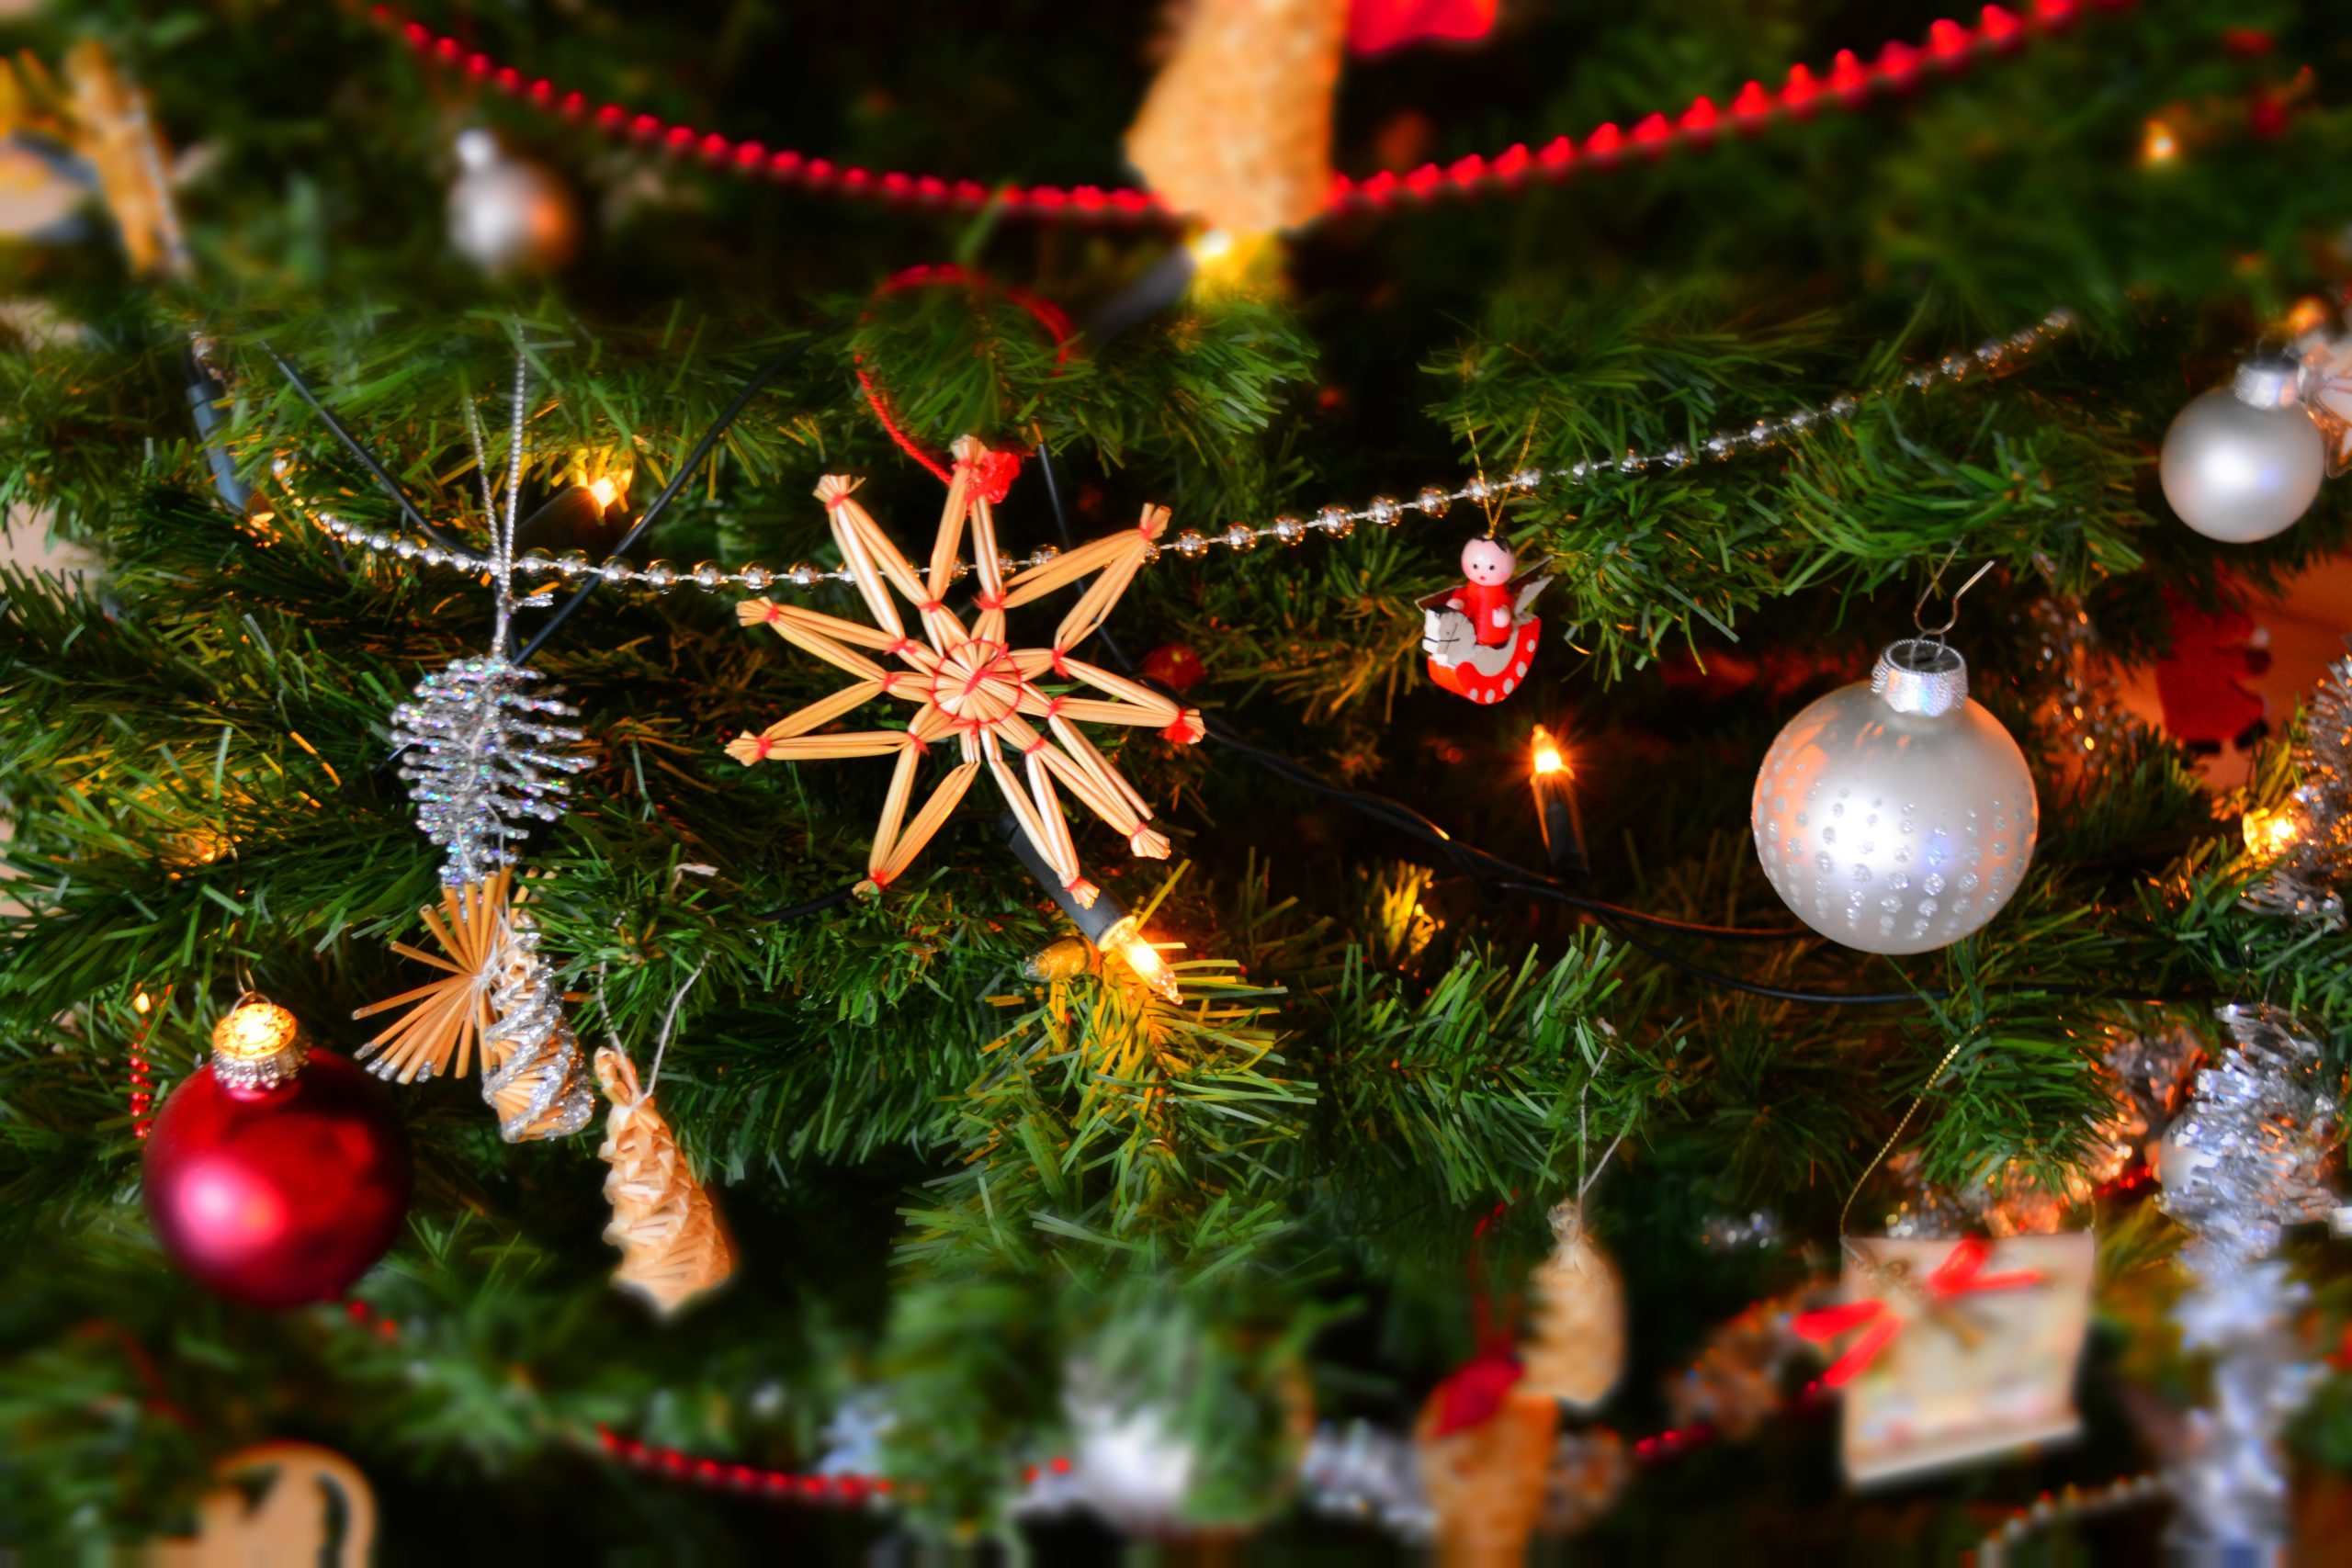 Close-up of Christmas tree with lights and hanging decorations